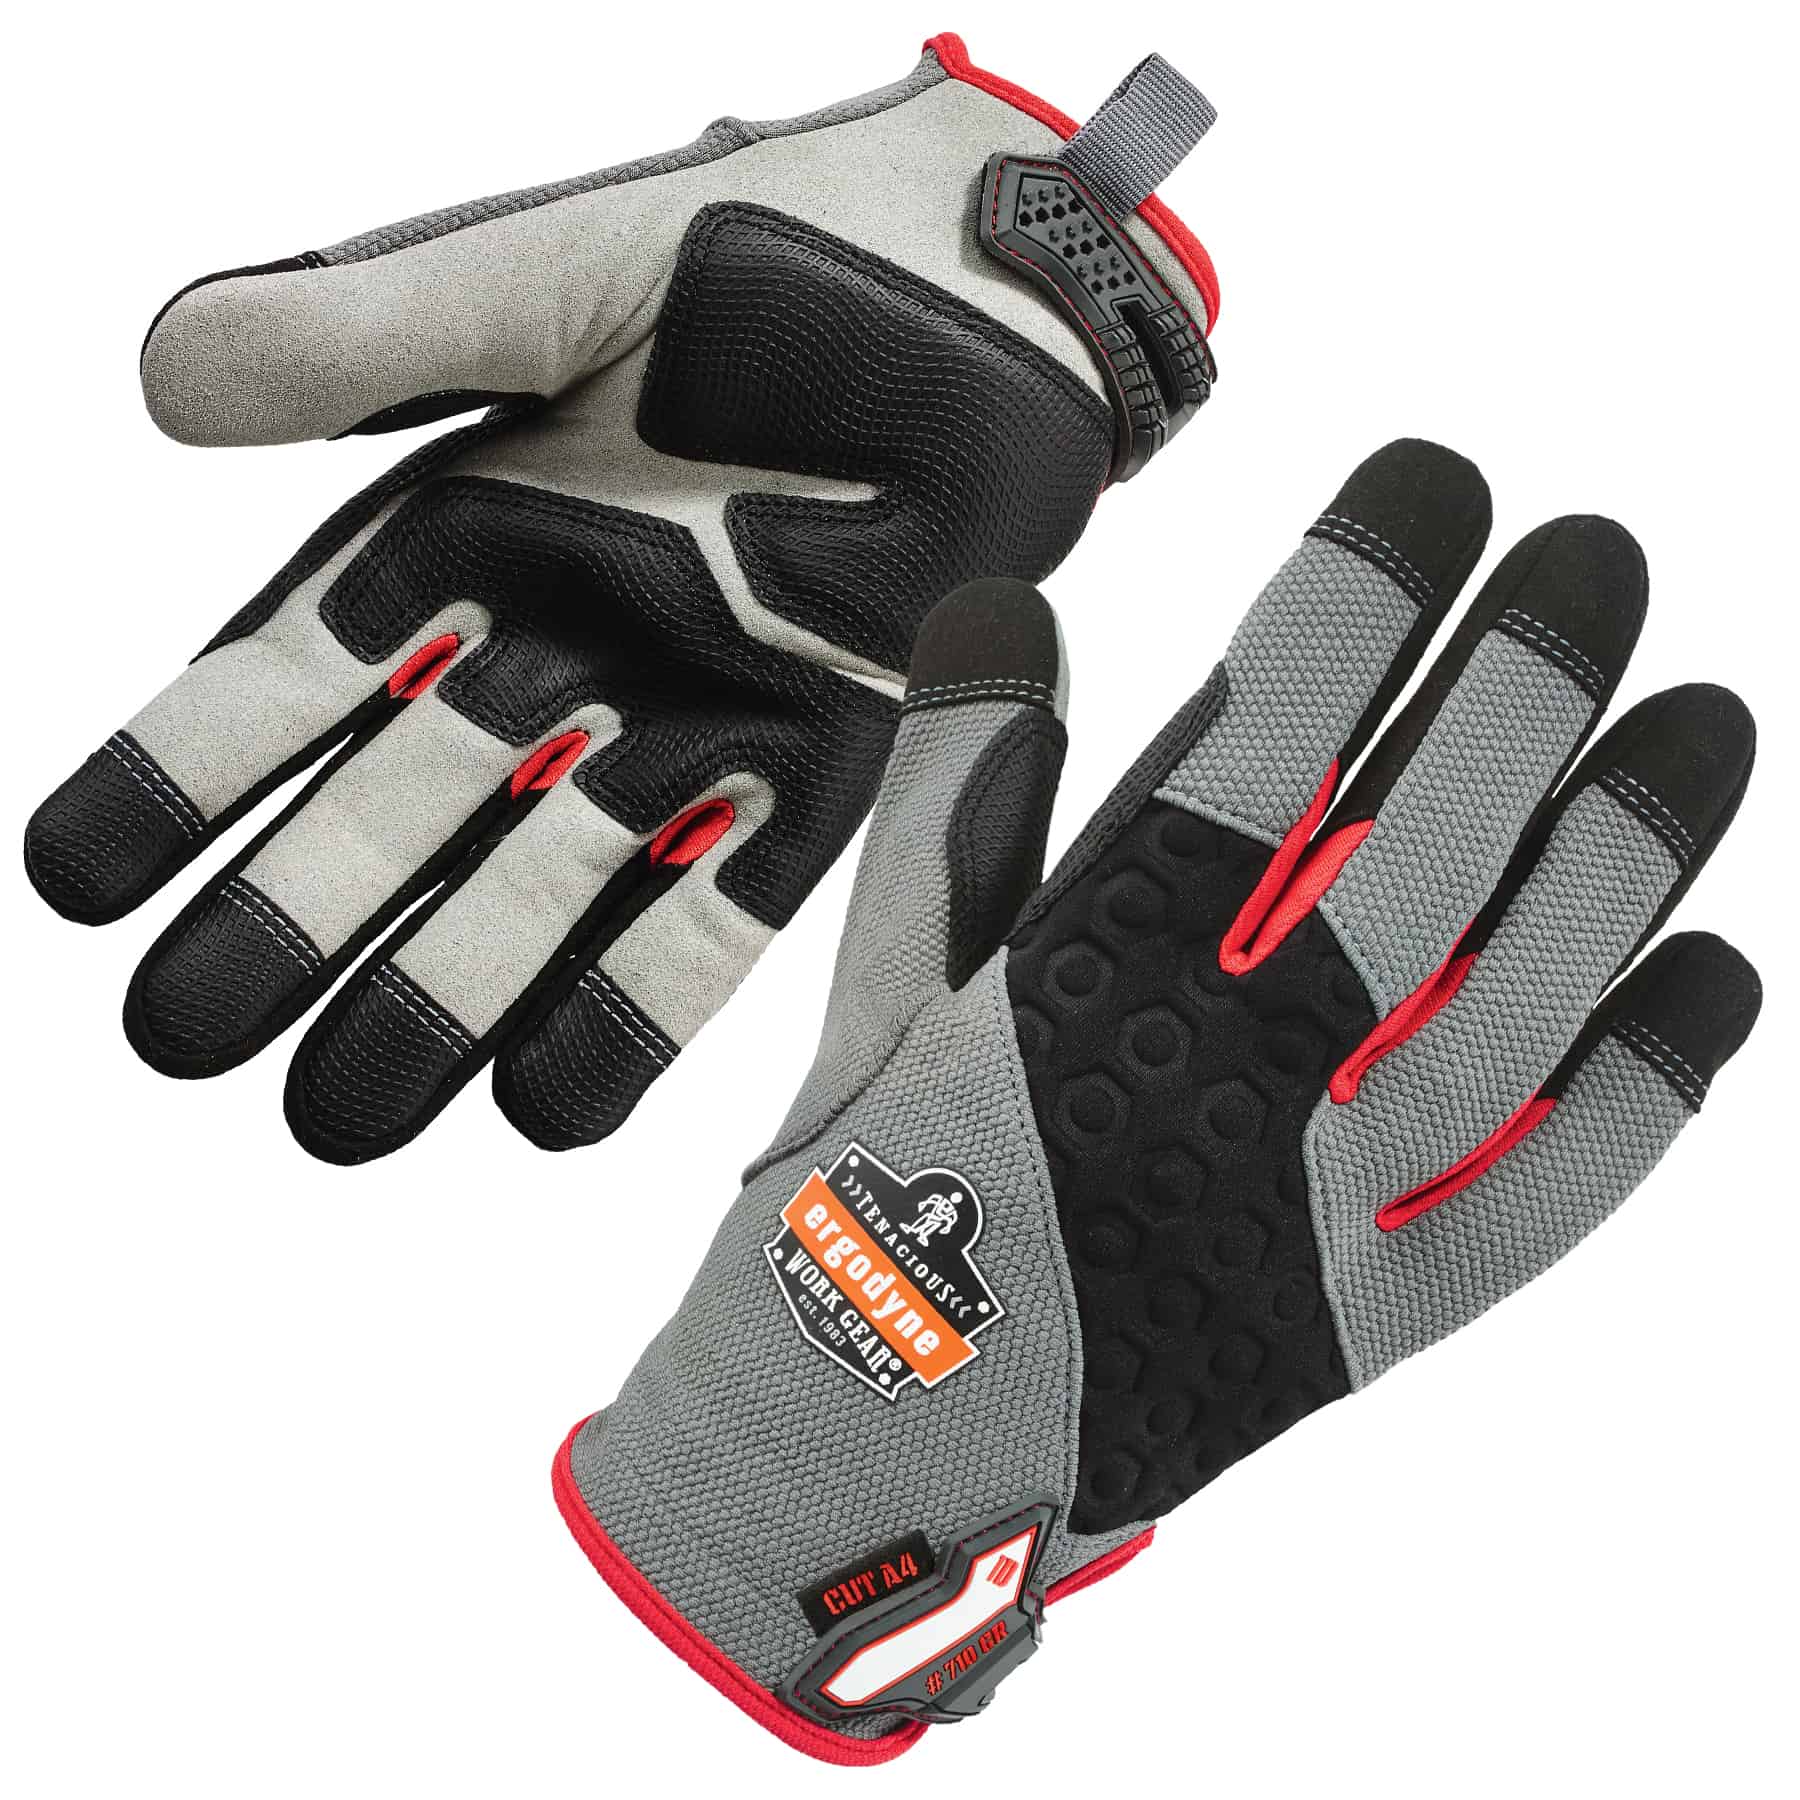 Wholesale Price Heavy-Duty + Cut Resistance Gloves, protective gloves for  cutting 